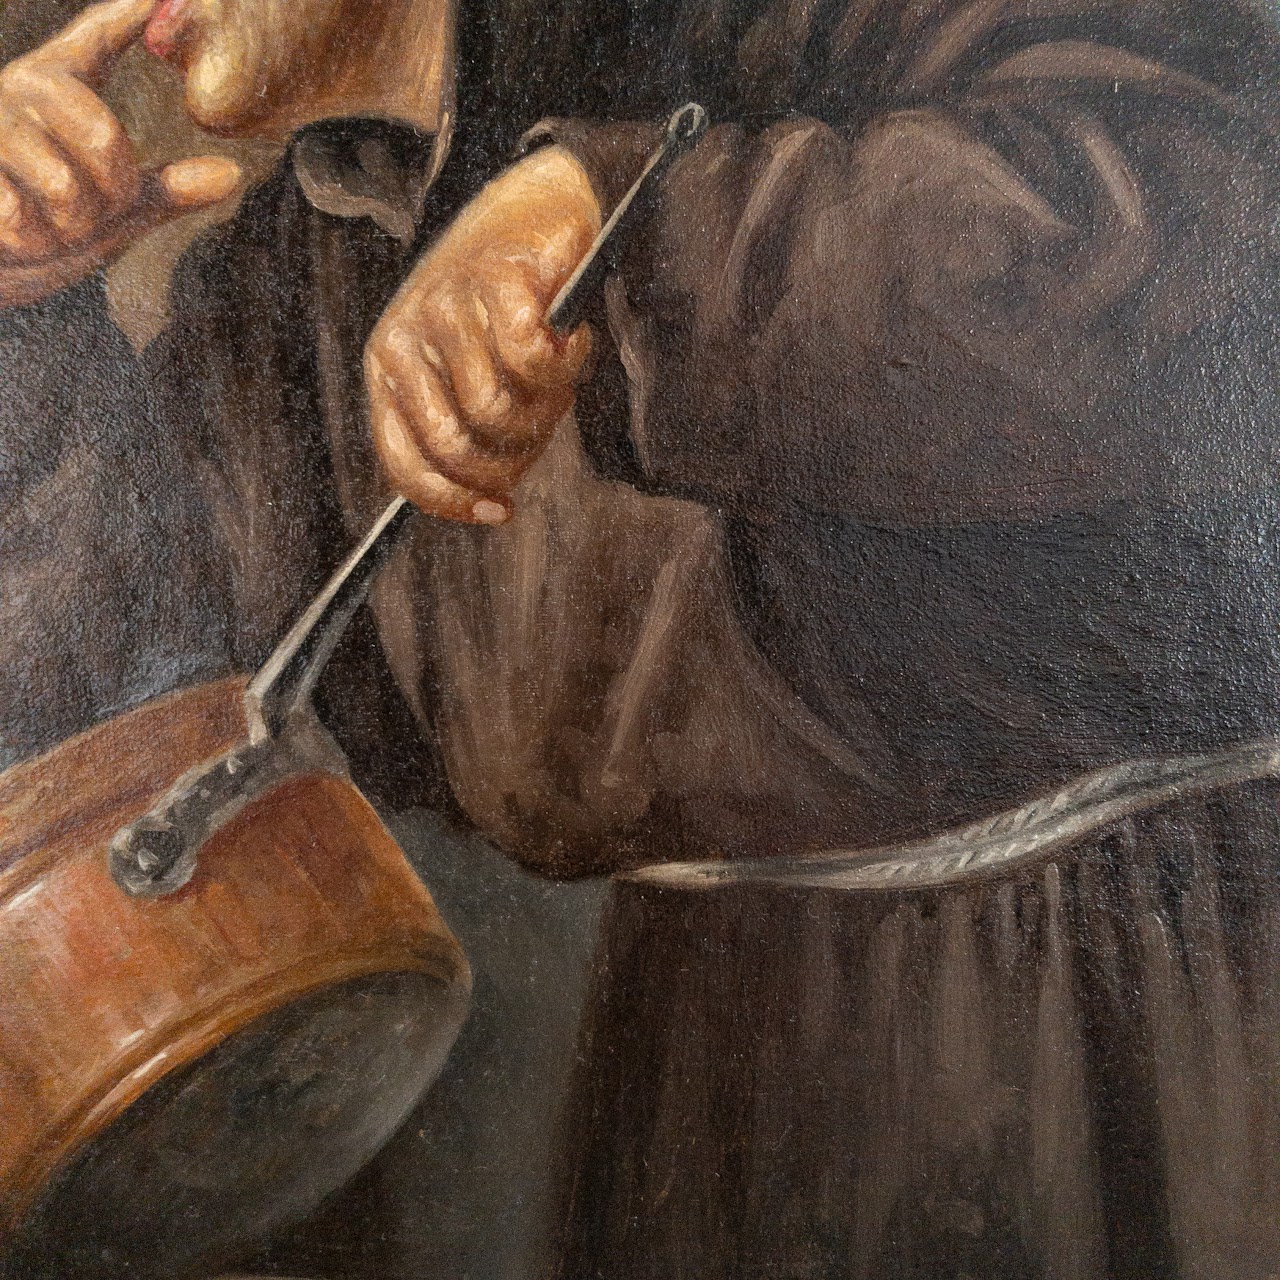 Signed Feasting Friars Oil Painting